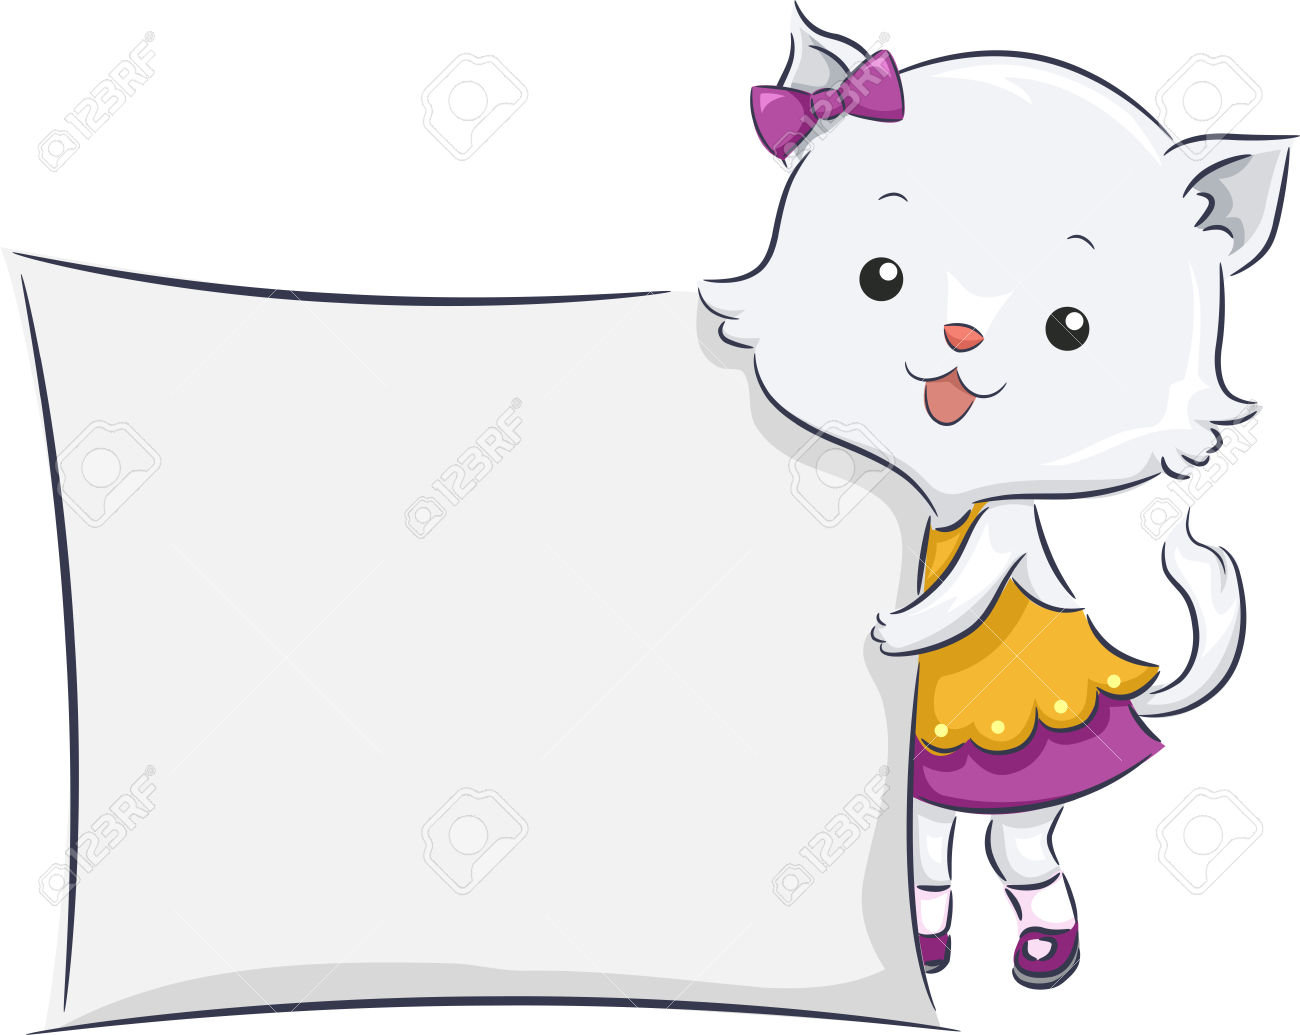 Illustration Featuring A Cute Female Cat Holding A Blank Board.